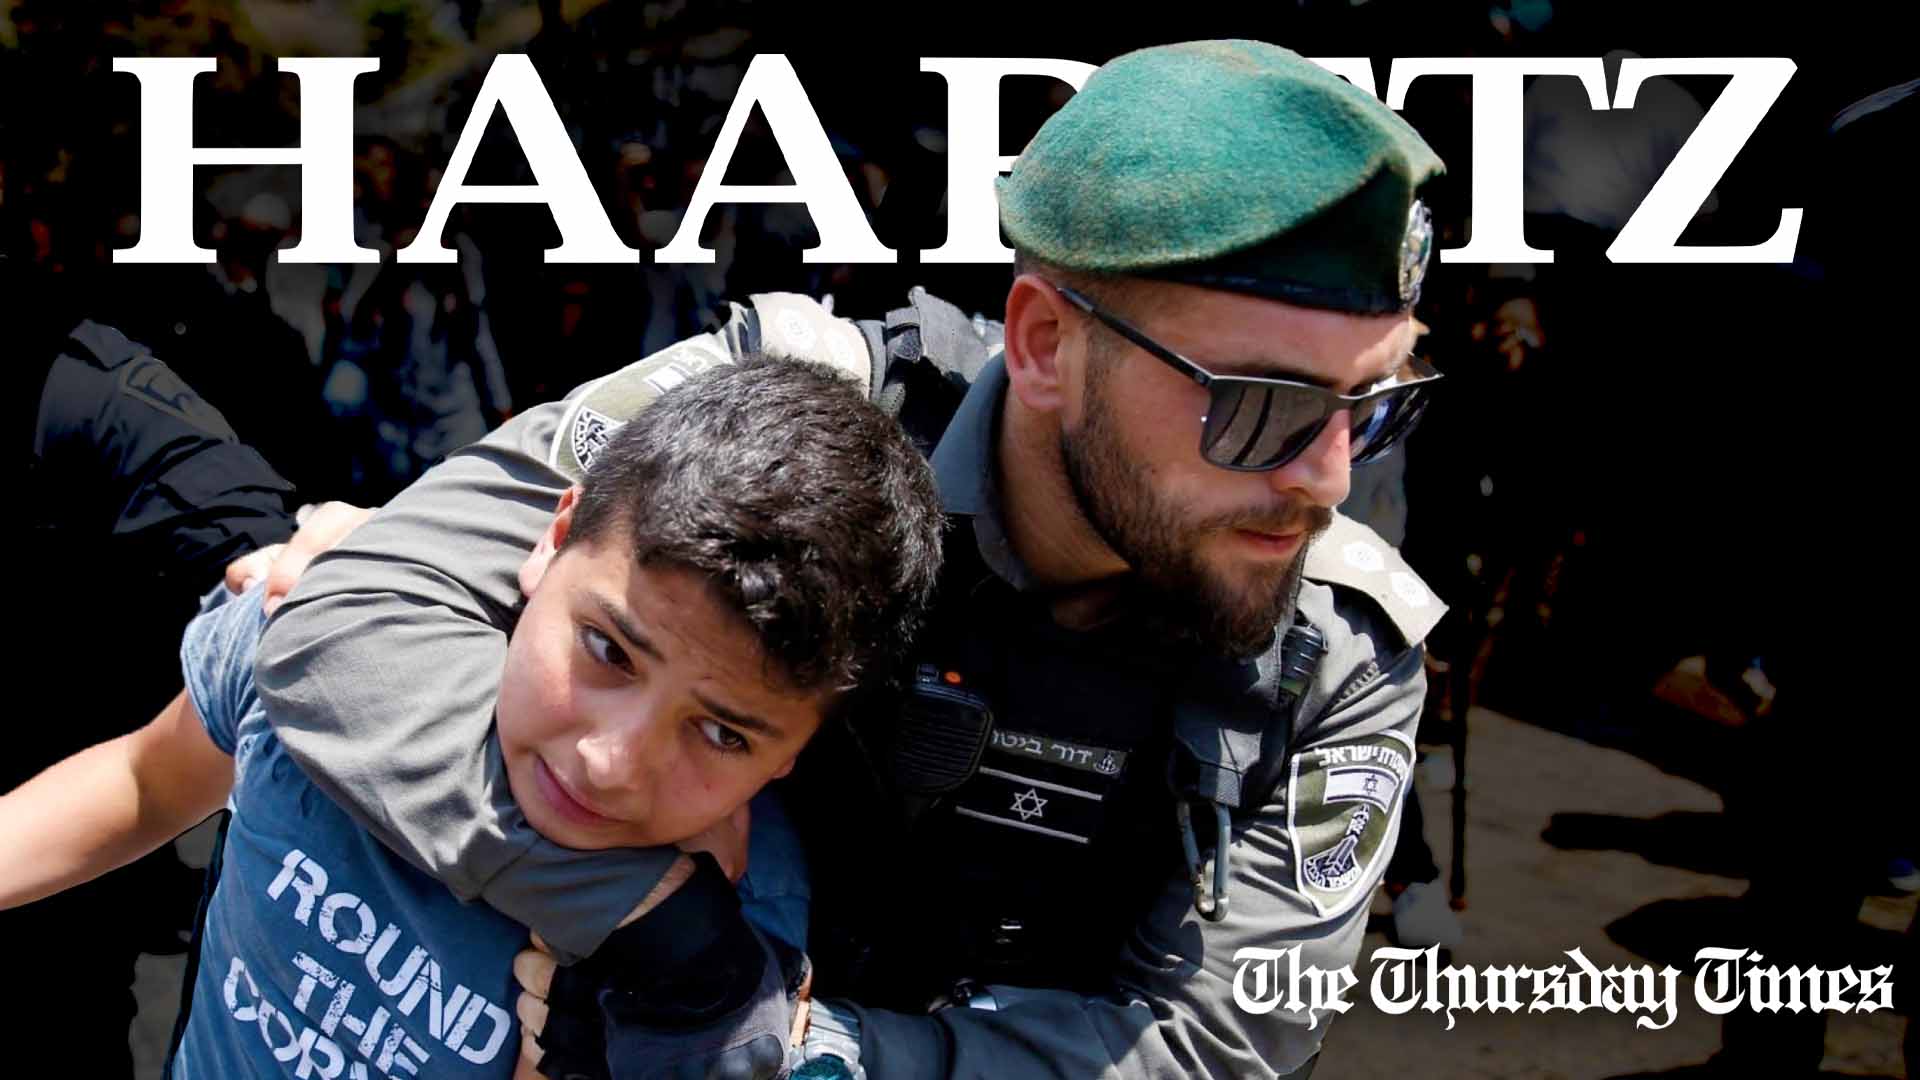 Members of the Israeli Defence Forces detain a Palestinian child during a demonstration at the Al-Aqsa mosque. — AFP